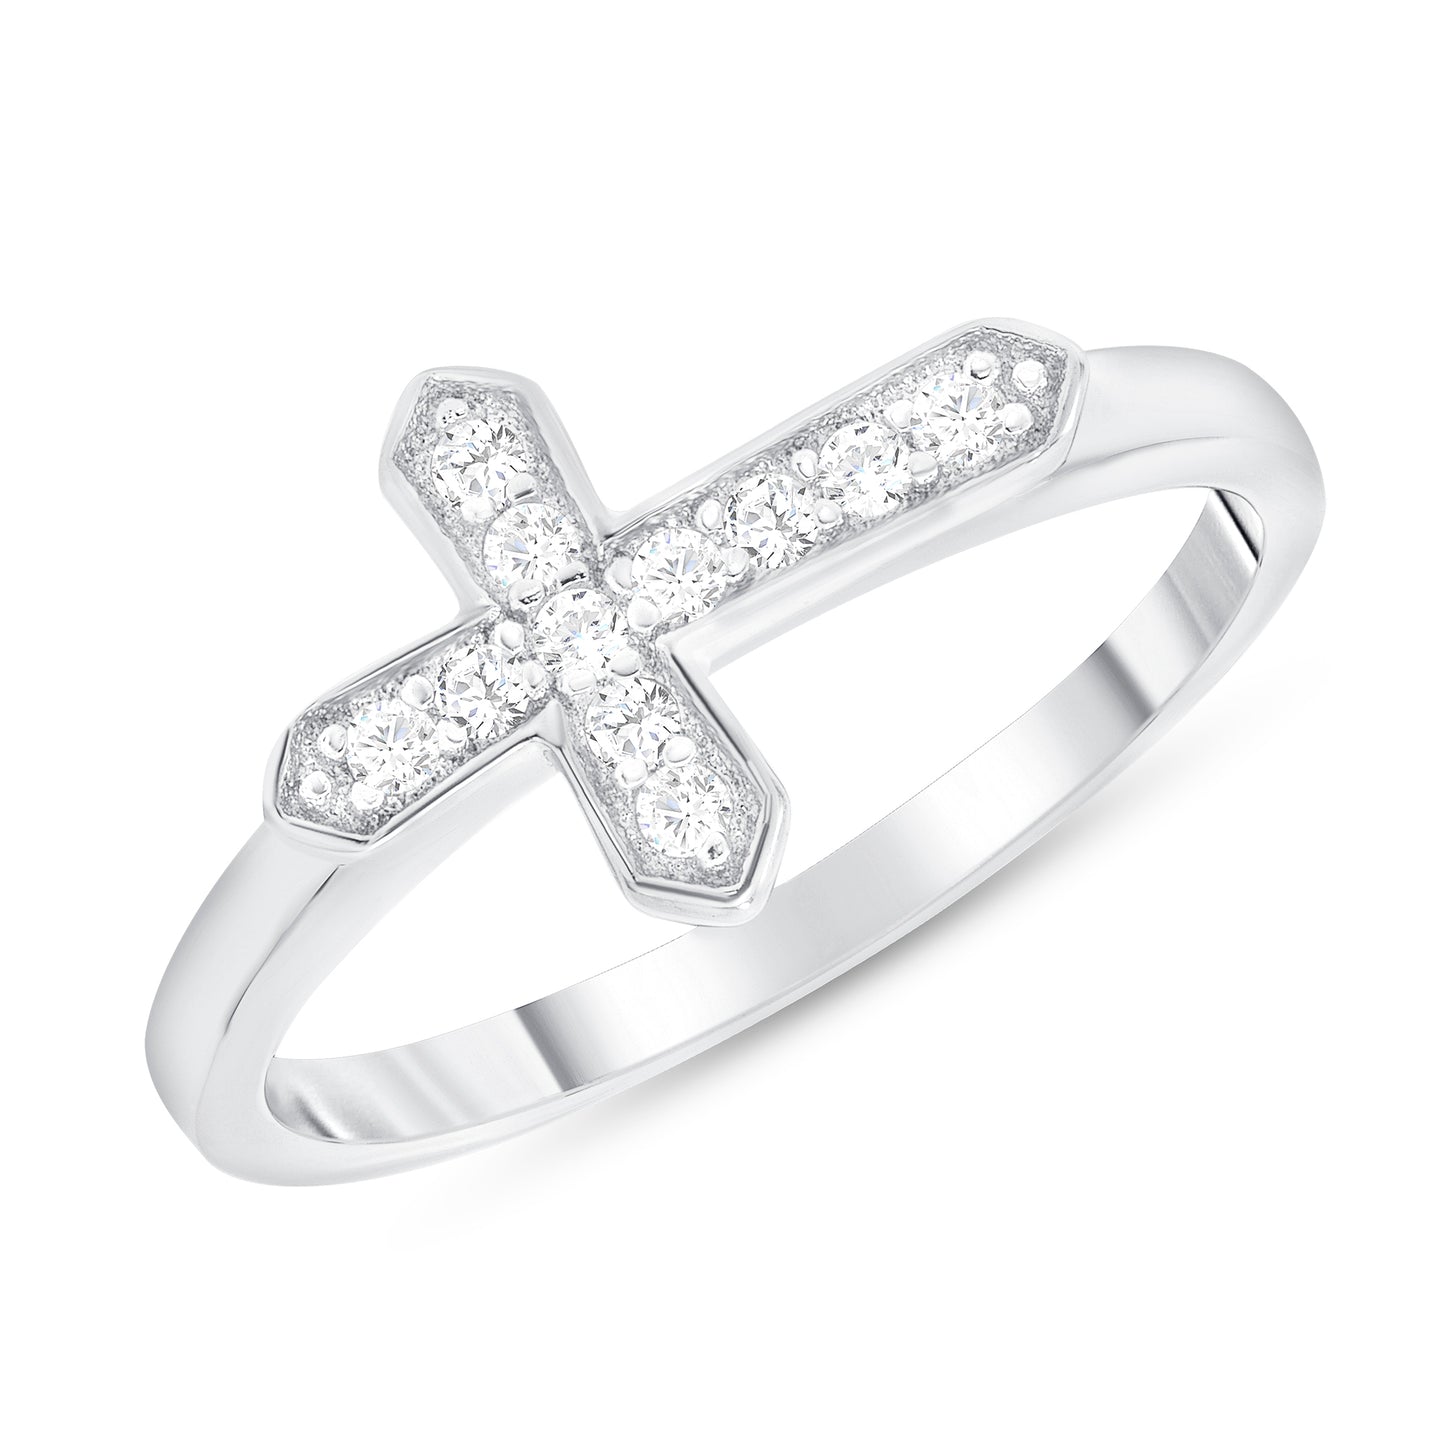 DGR1880. Silver 925 Rhodium Plated Cubic Zirconia Side Cross Ring